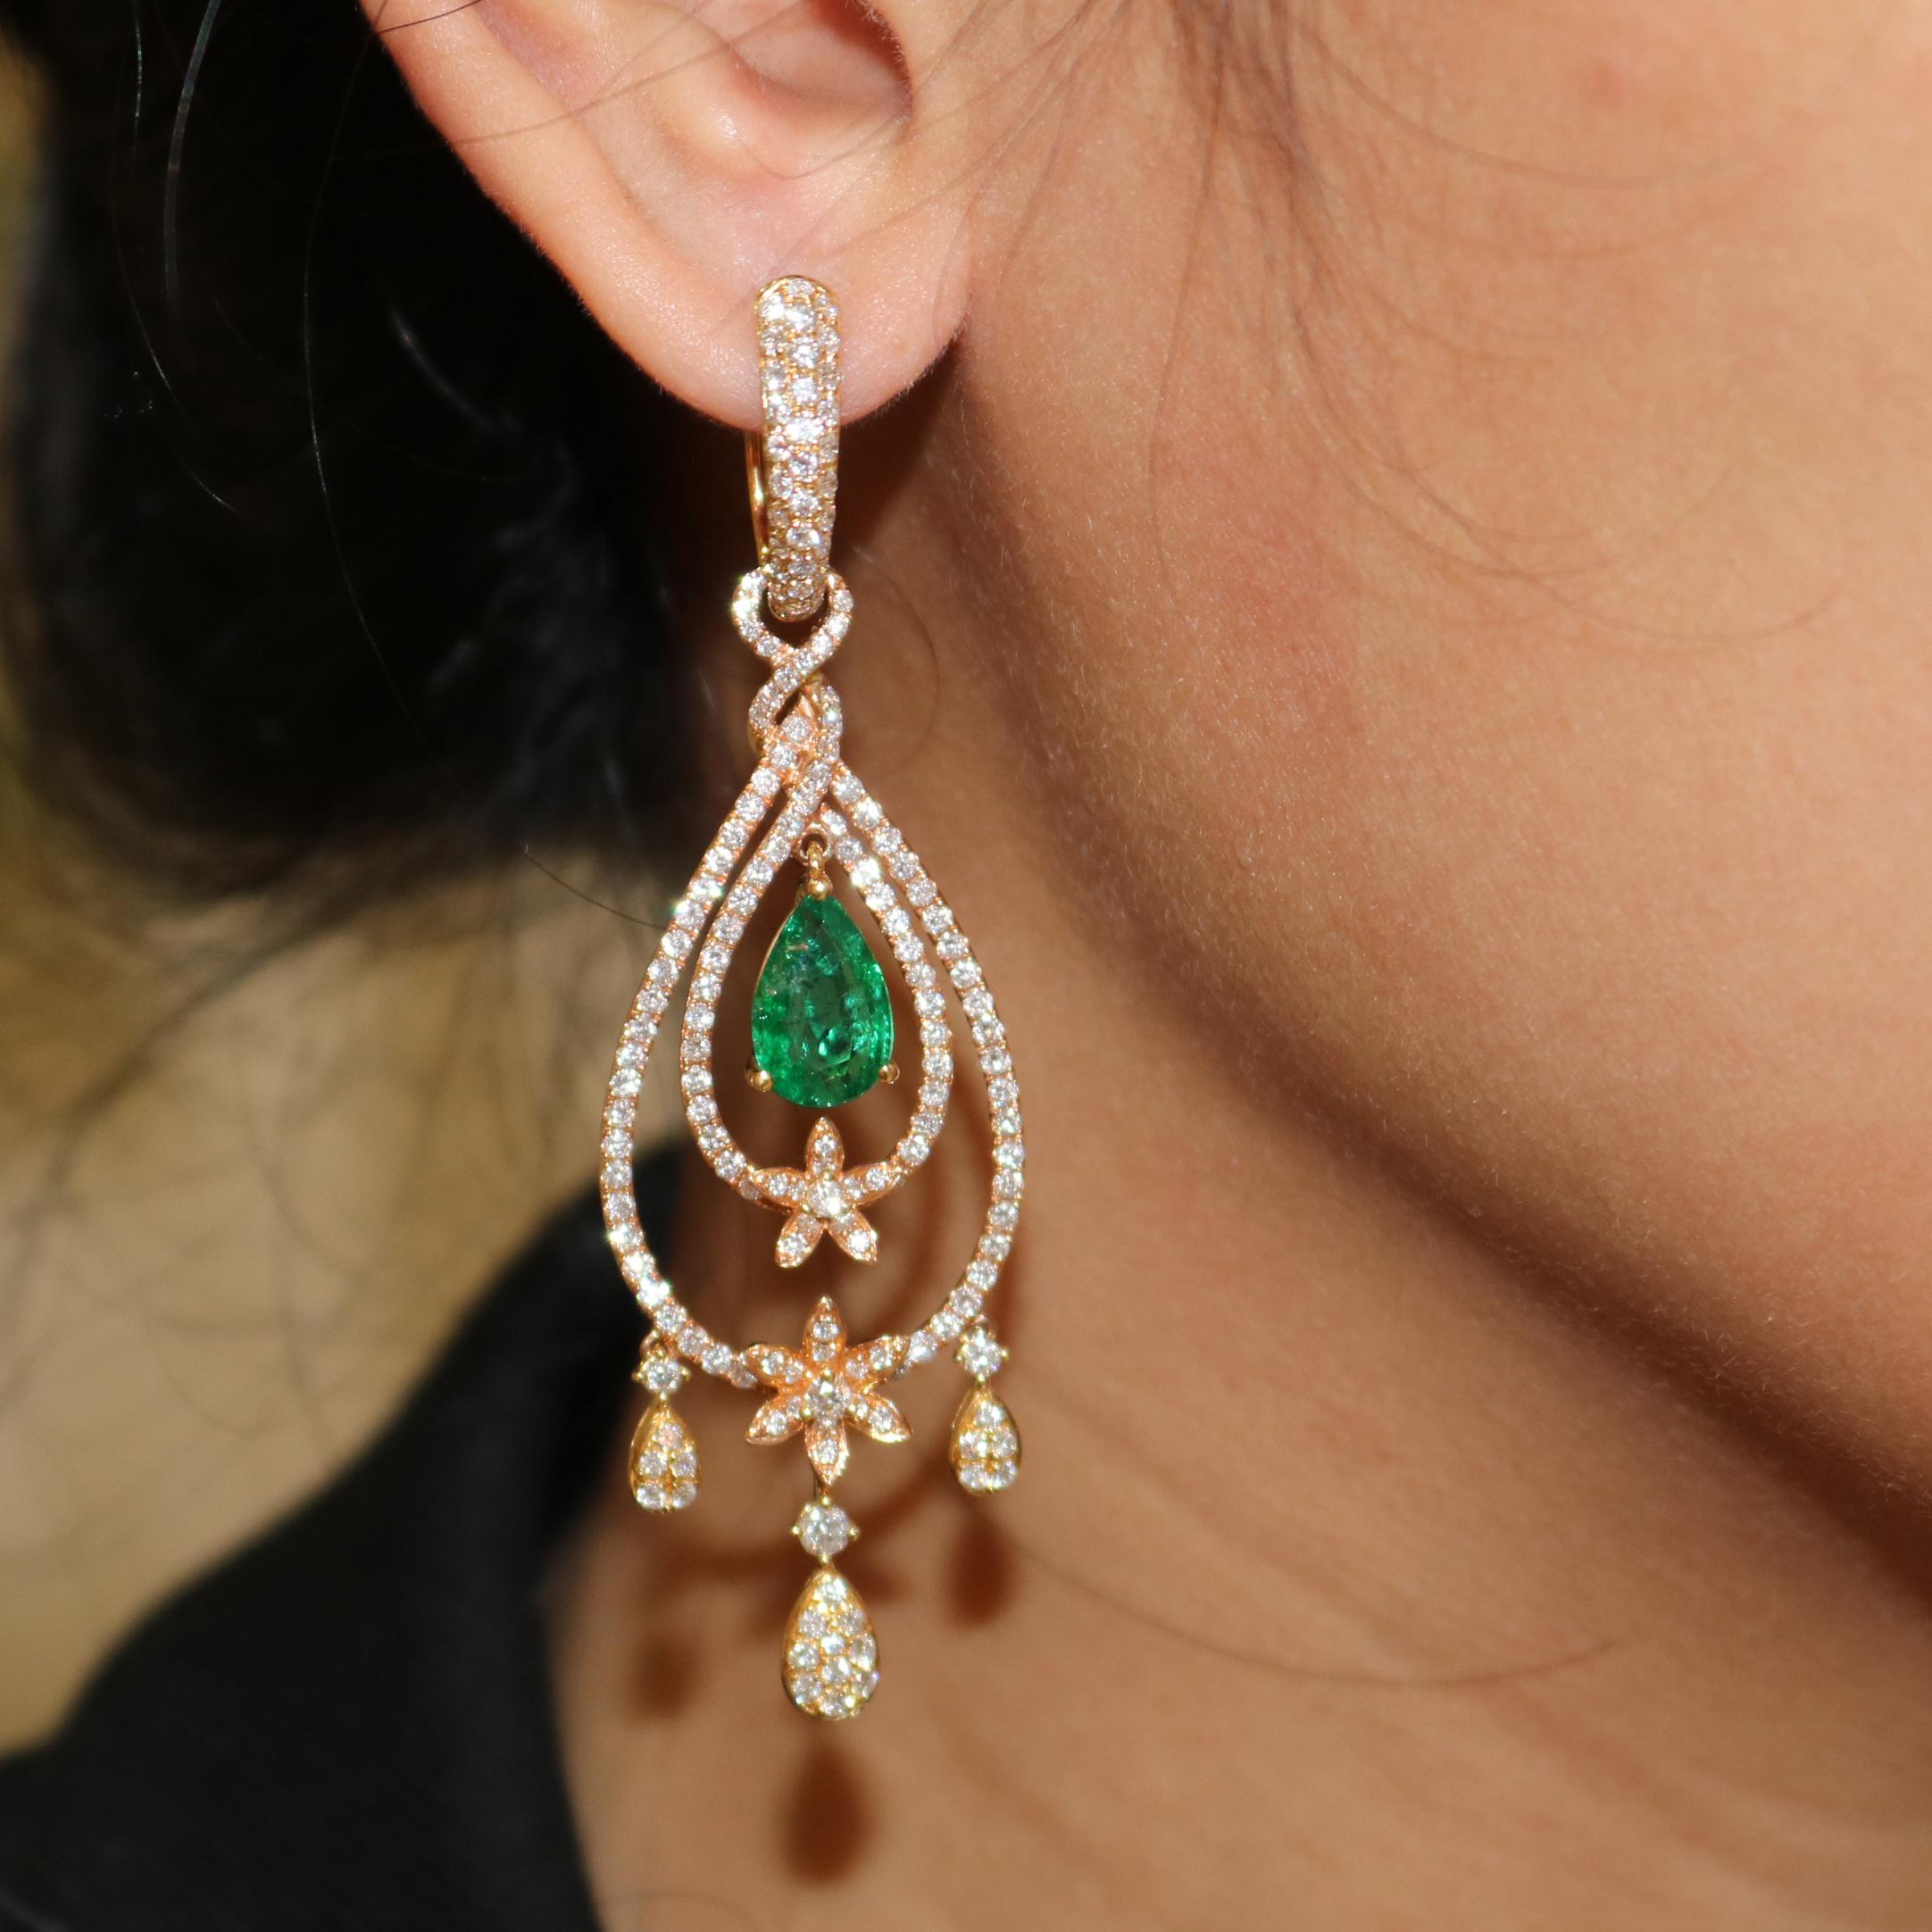 Amwaj Jewelry Rose Gold with Emerald Drop Earrings In New Condition For Sale In Abu Dhabi, Abu Dhabi